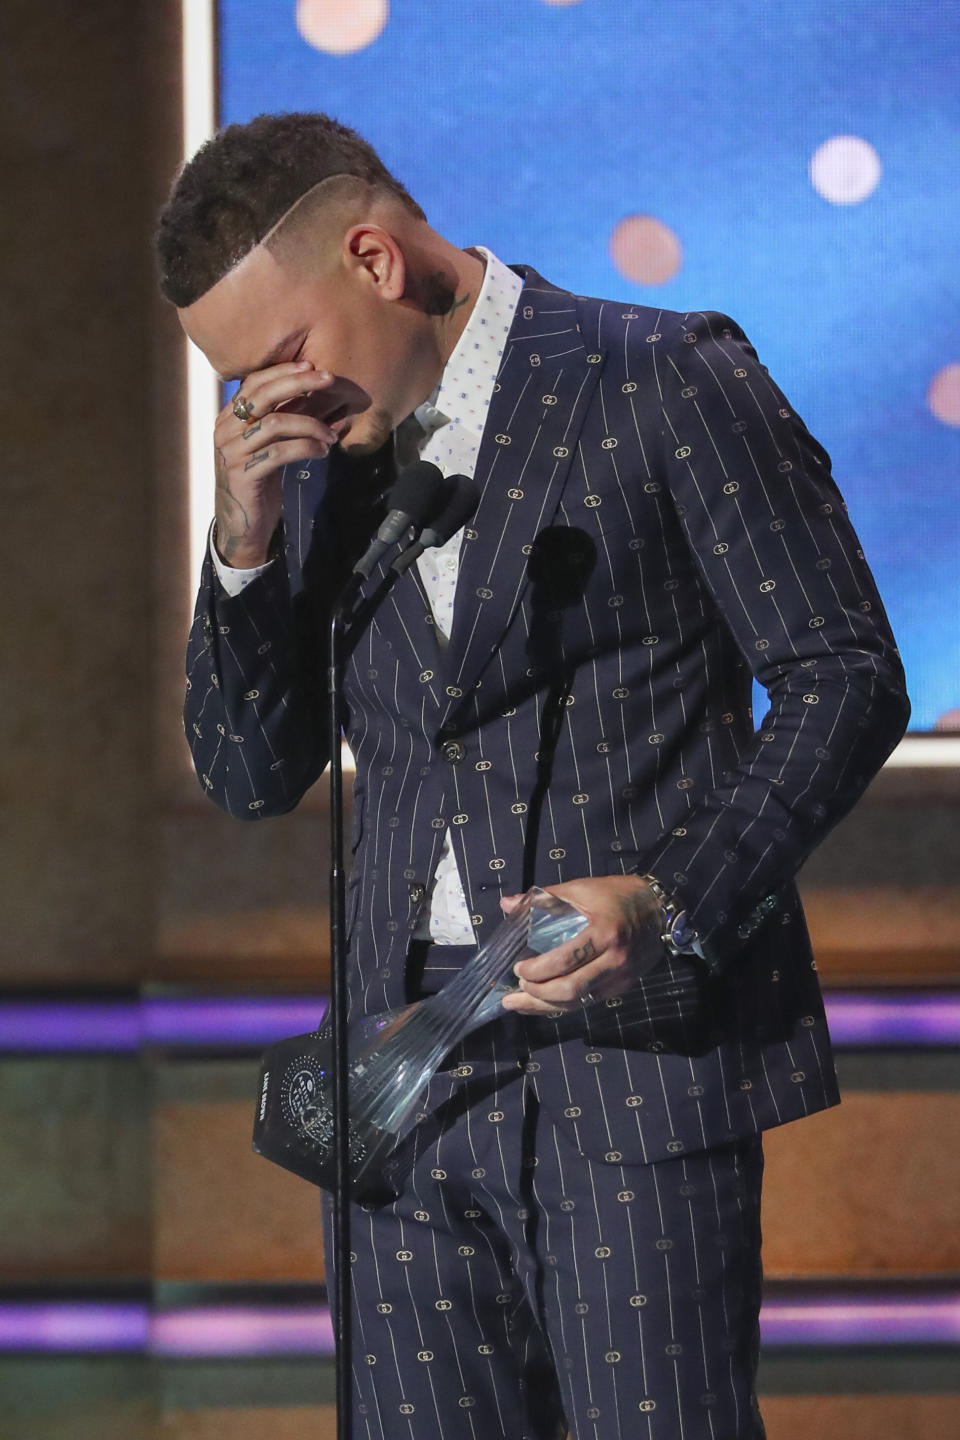 Kane Brown breaks down as he accepts the Artist of the Year Award at 2019 CMT Artists of the Year in Nashville, Tenn., on Oct. 16, 2019. Brown dedicated the award to his drummer Kenny Dixon who died in a car accident. (Photo by Al Wagner/Invision/AP)